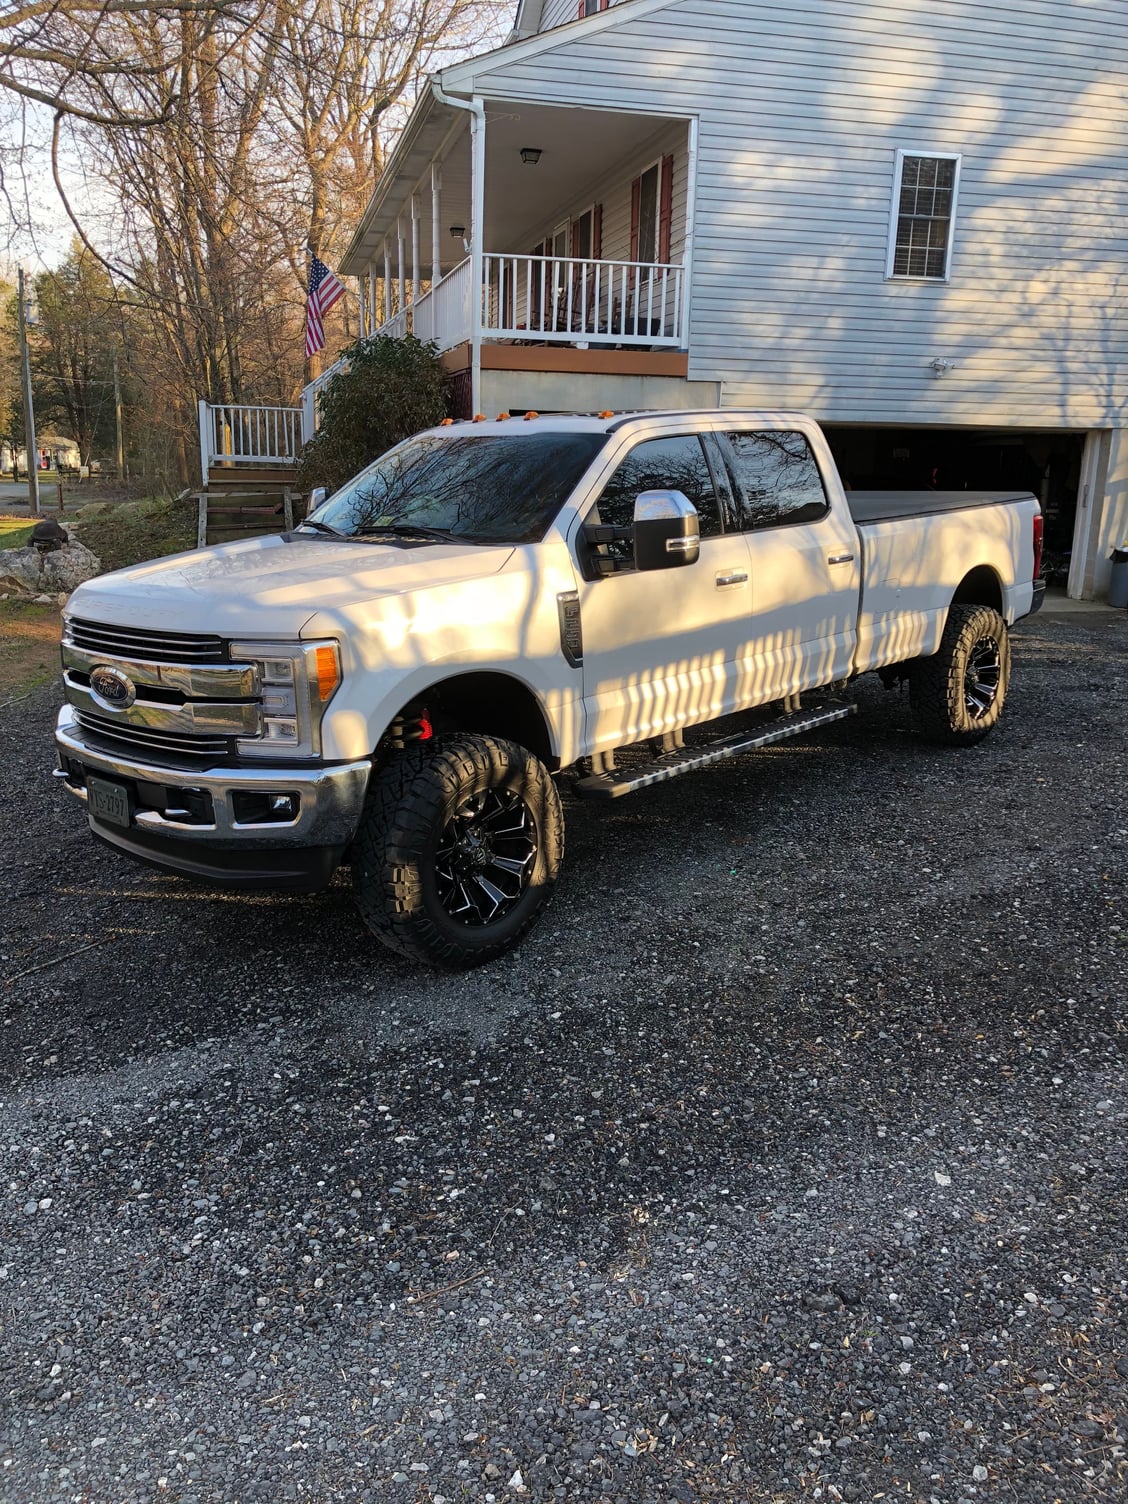 Steering/Suspension - 3.5" Readylift Lift - Used - 2017 to 2019 Ford F-250 HD - Manassas, VA 20112, United States